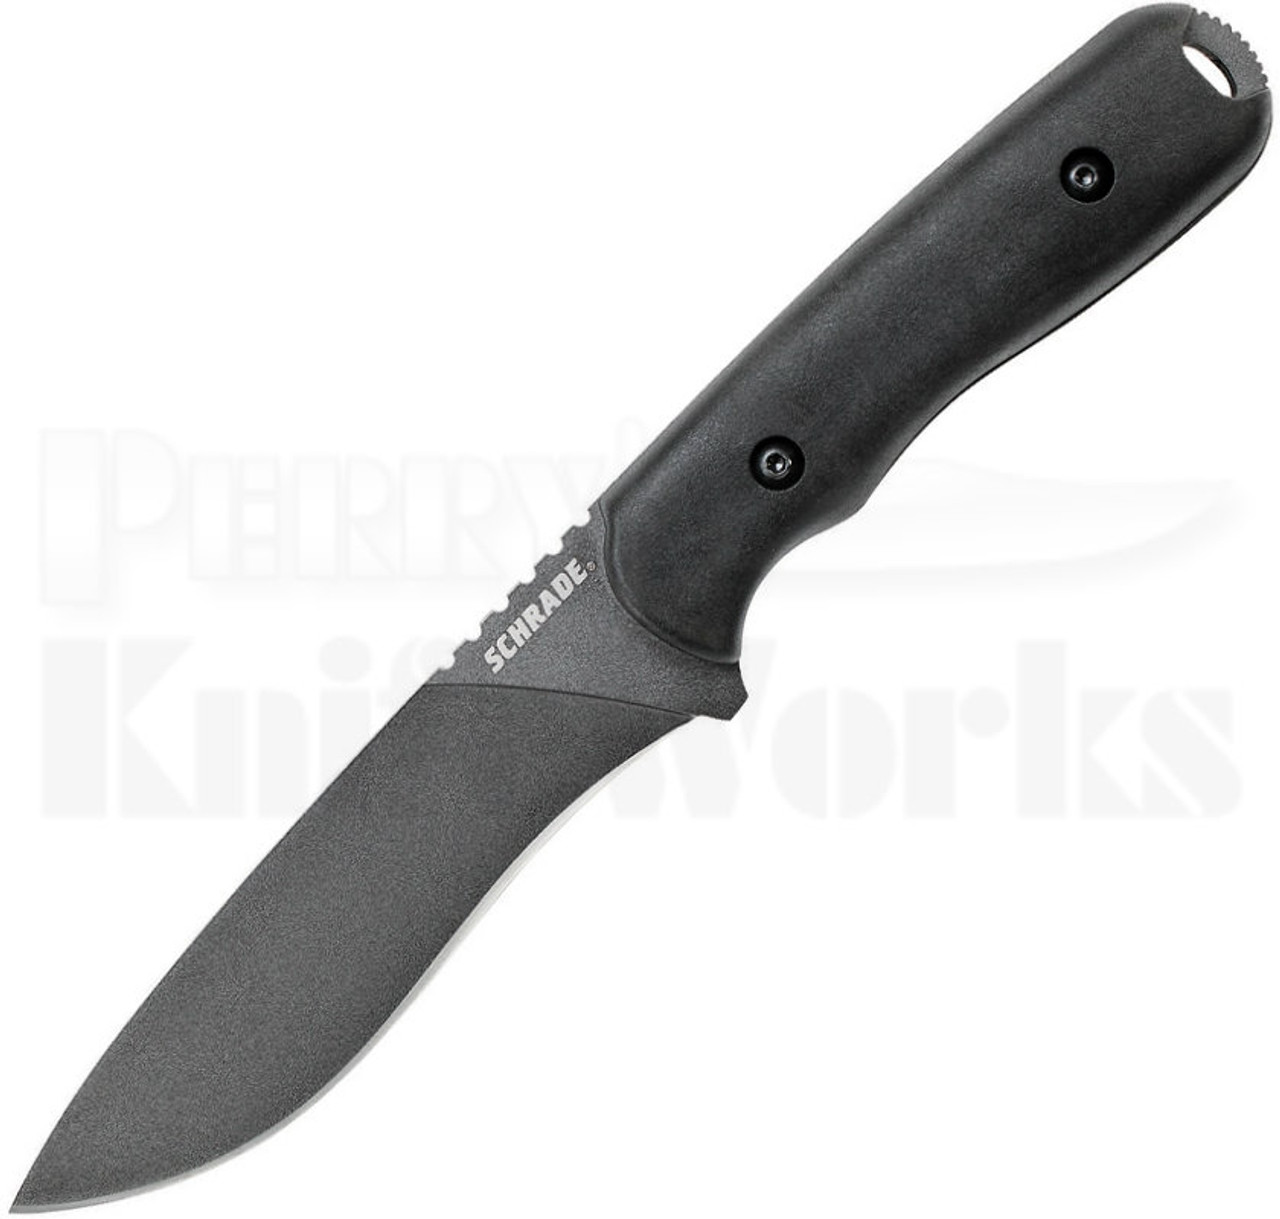 https://cdn11.bigcommerce.com/s-ar8byh/images/stencil/1280x1280/products/7438/23619/Schrade-Frontier-Fixed-Blade-Knife-Black-SCHF42__66019.1503613684.jpg?c=2